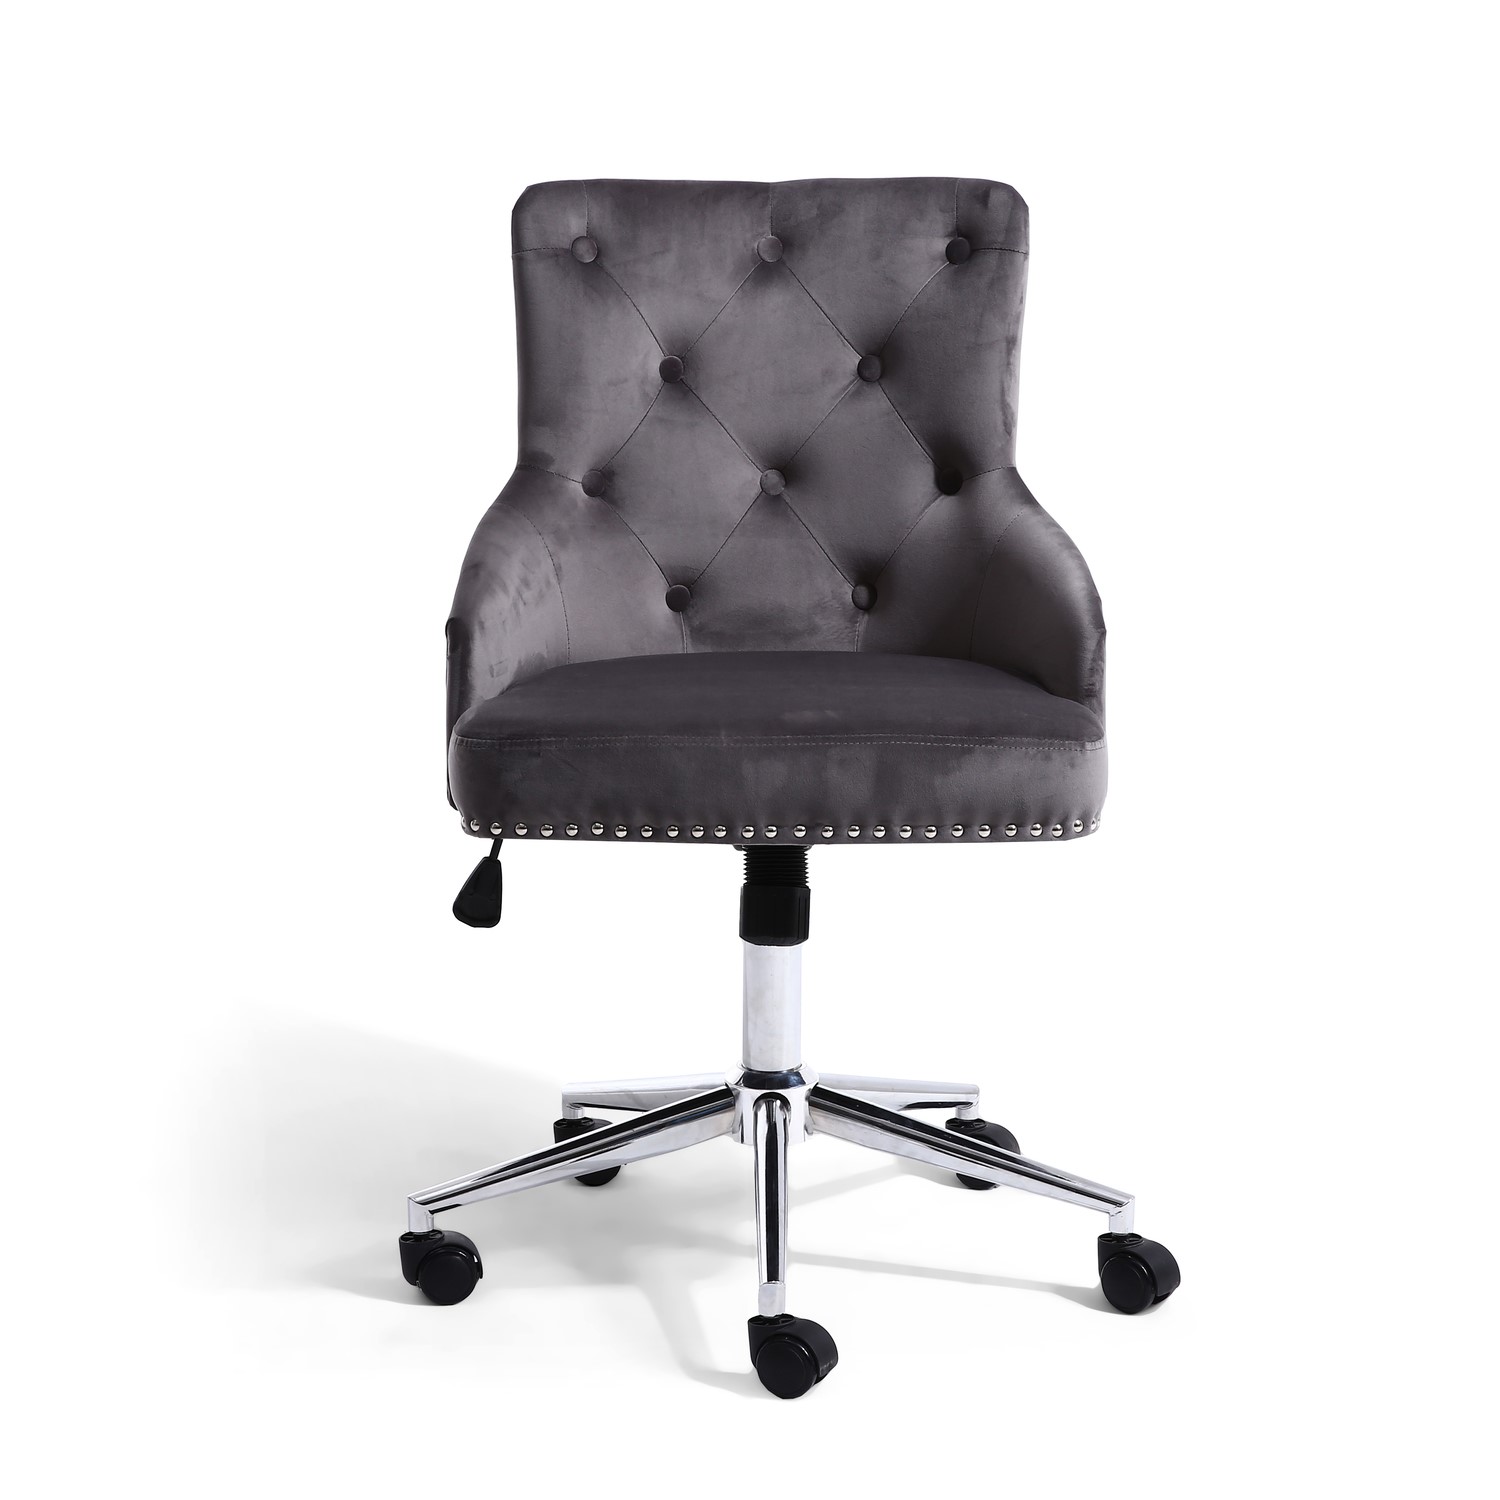 Grey Velvet Luxury Tufted Office Chair with Stud Detail 096-09-03-10-01 